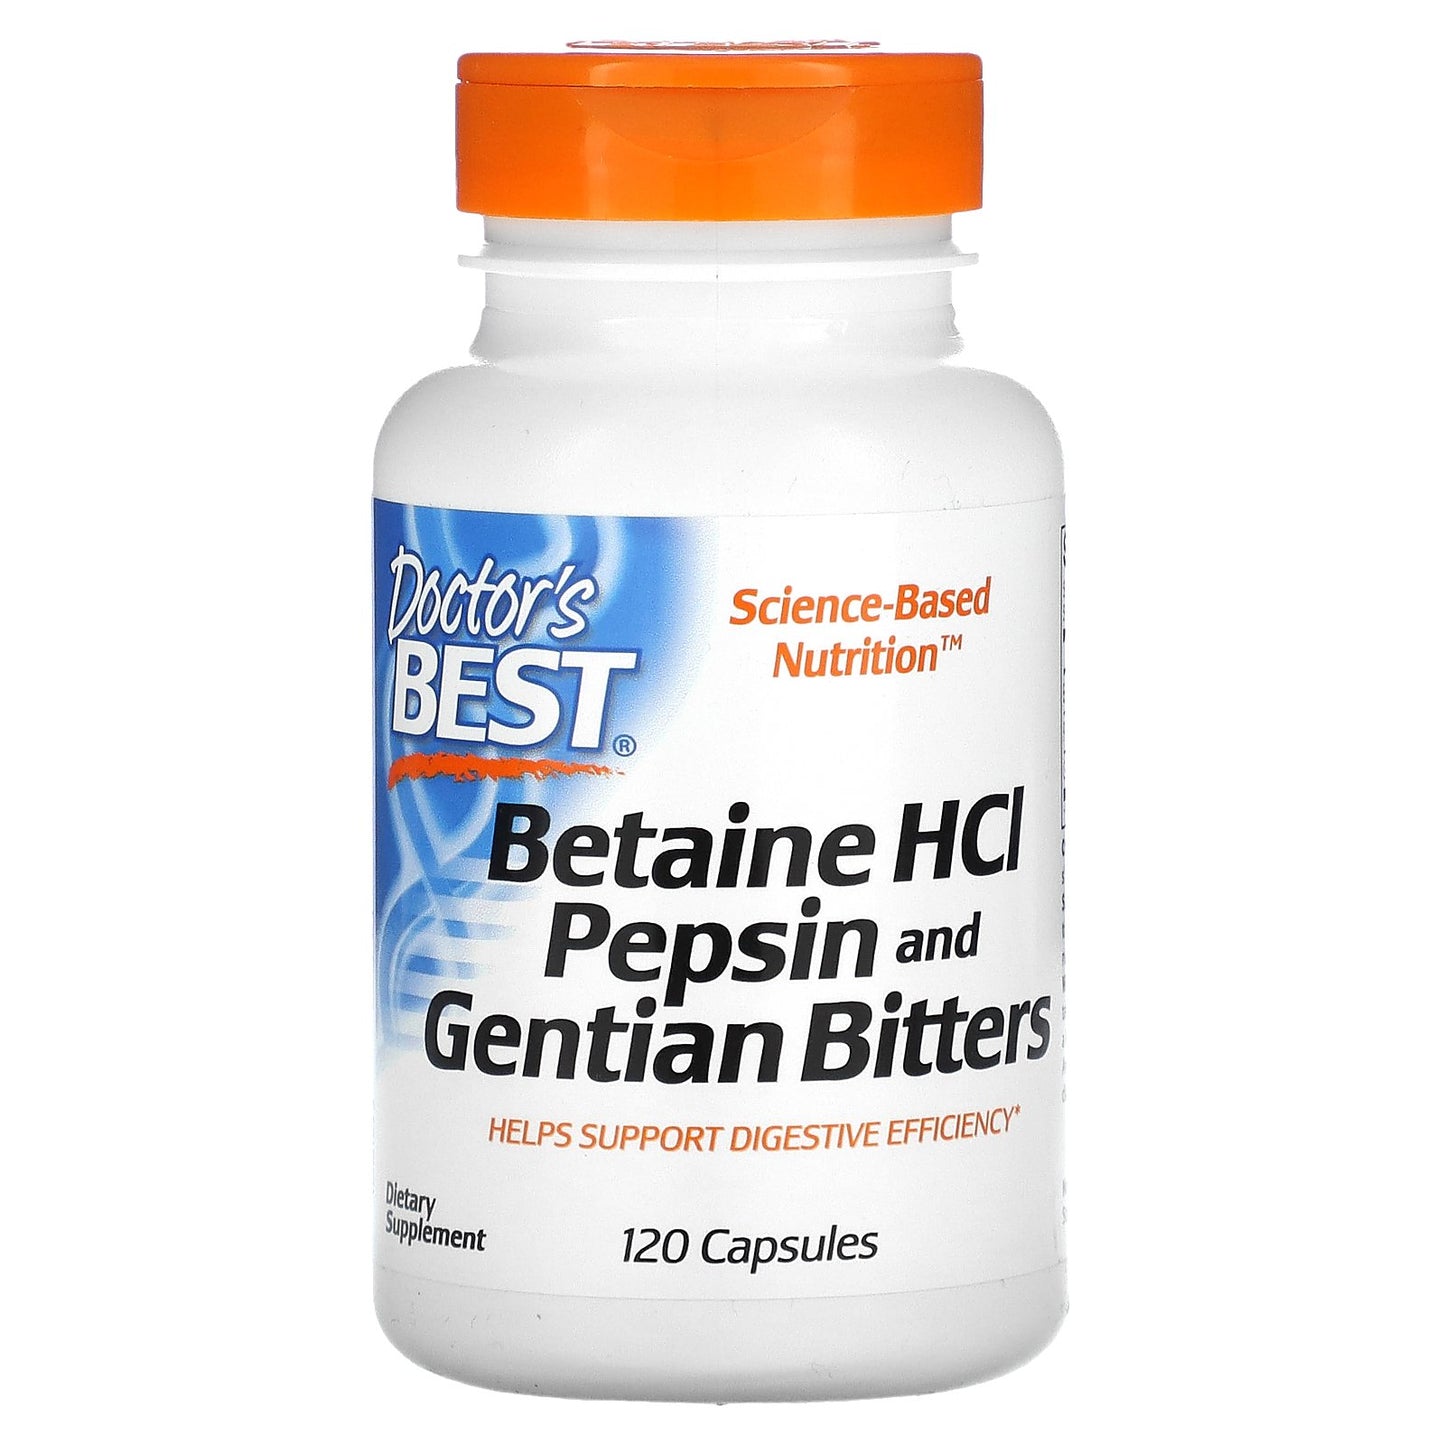 Doctor's Best Betaine HCL Pepsin & Gentian Bitters, 120 Capsules